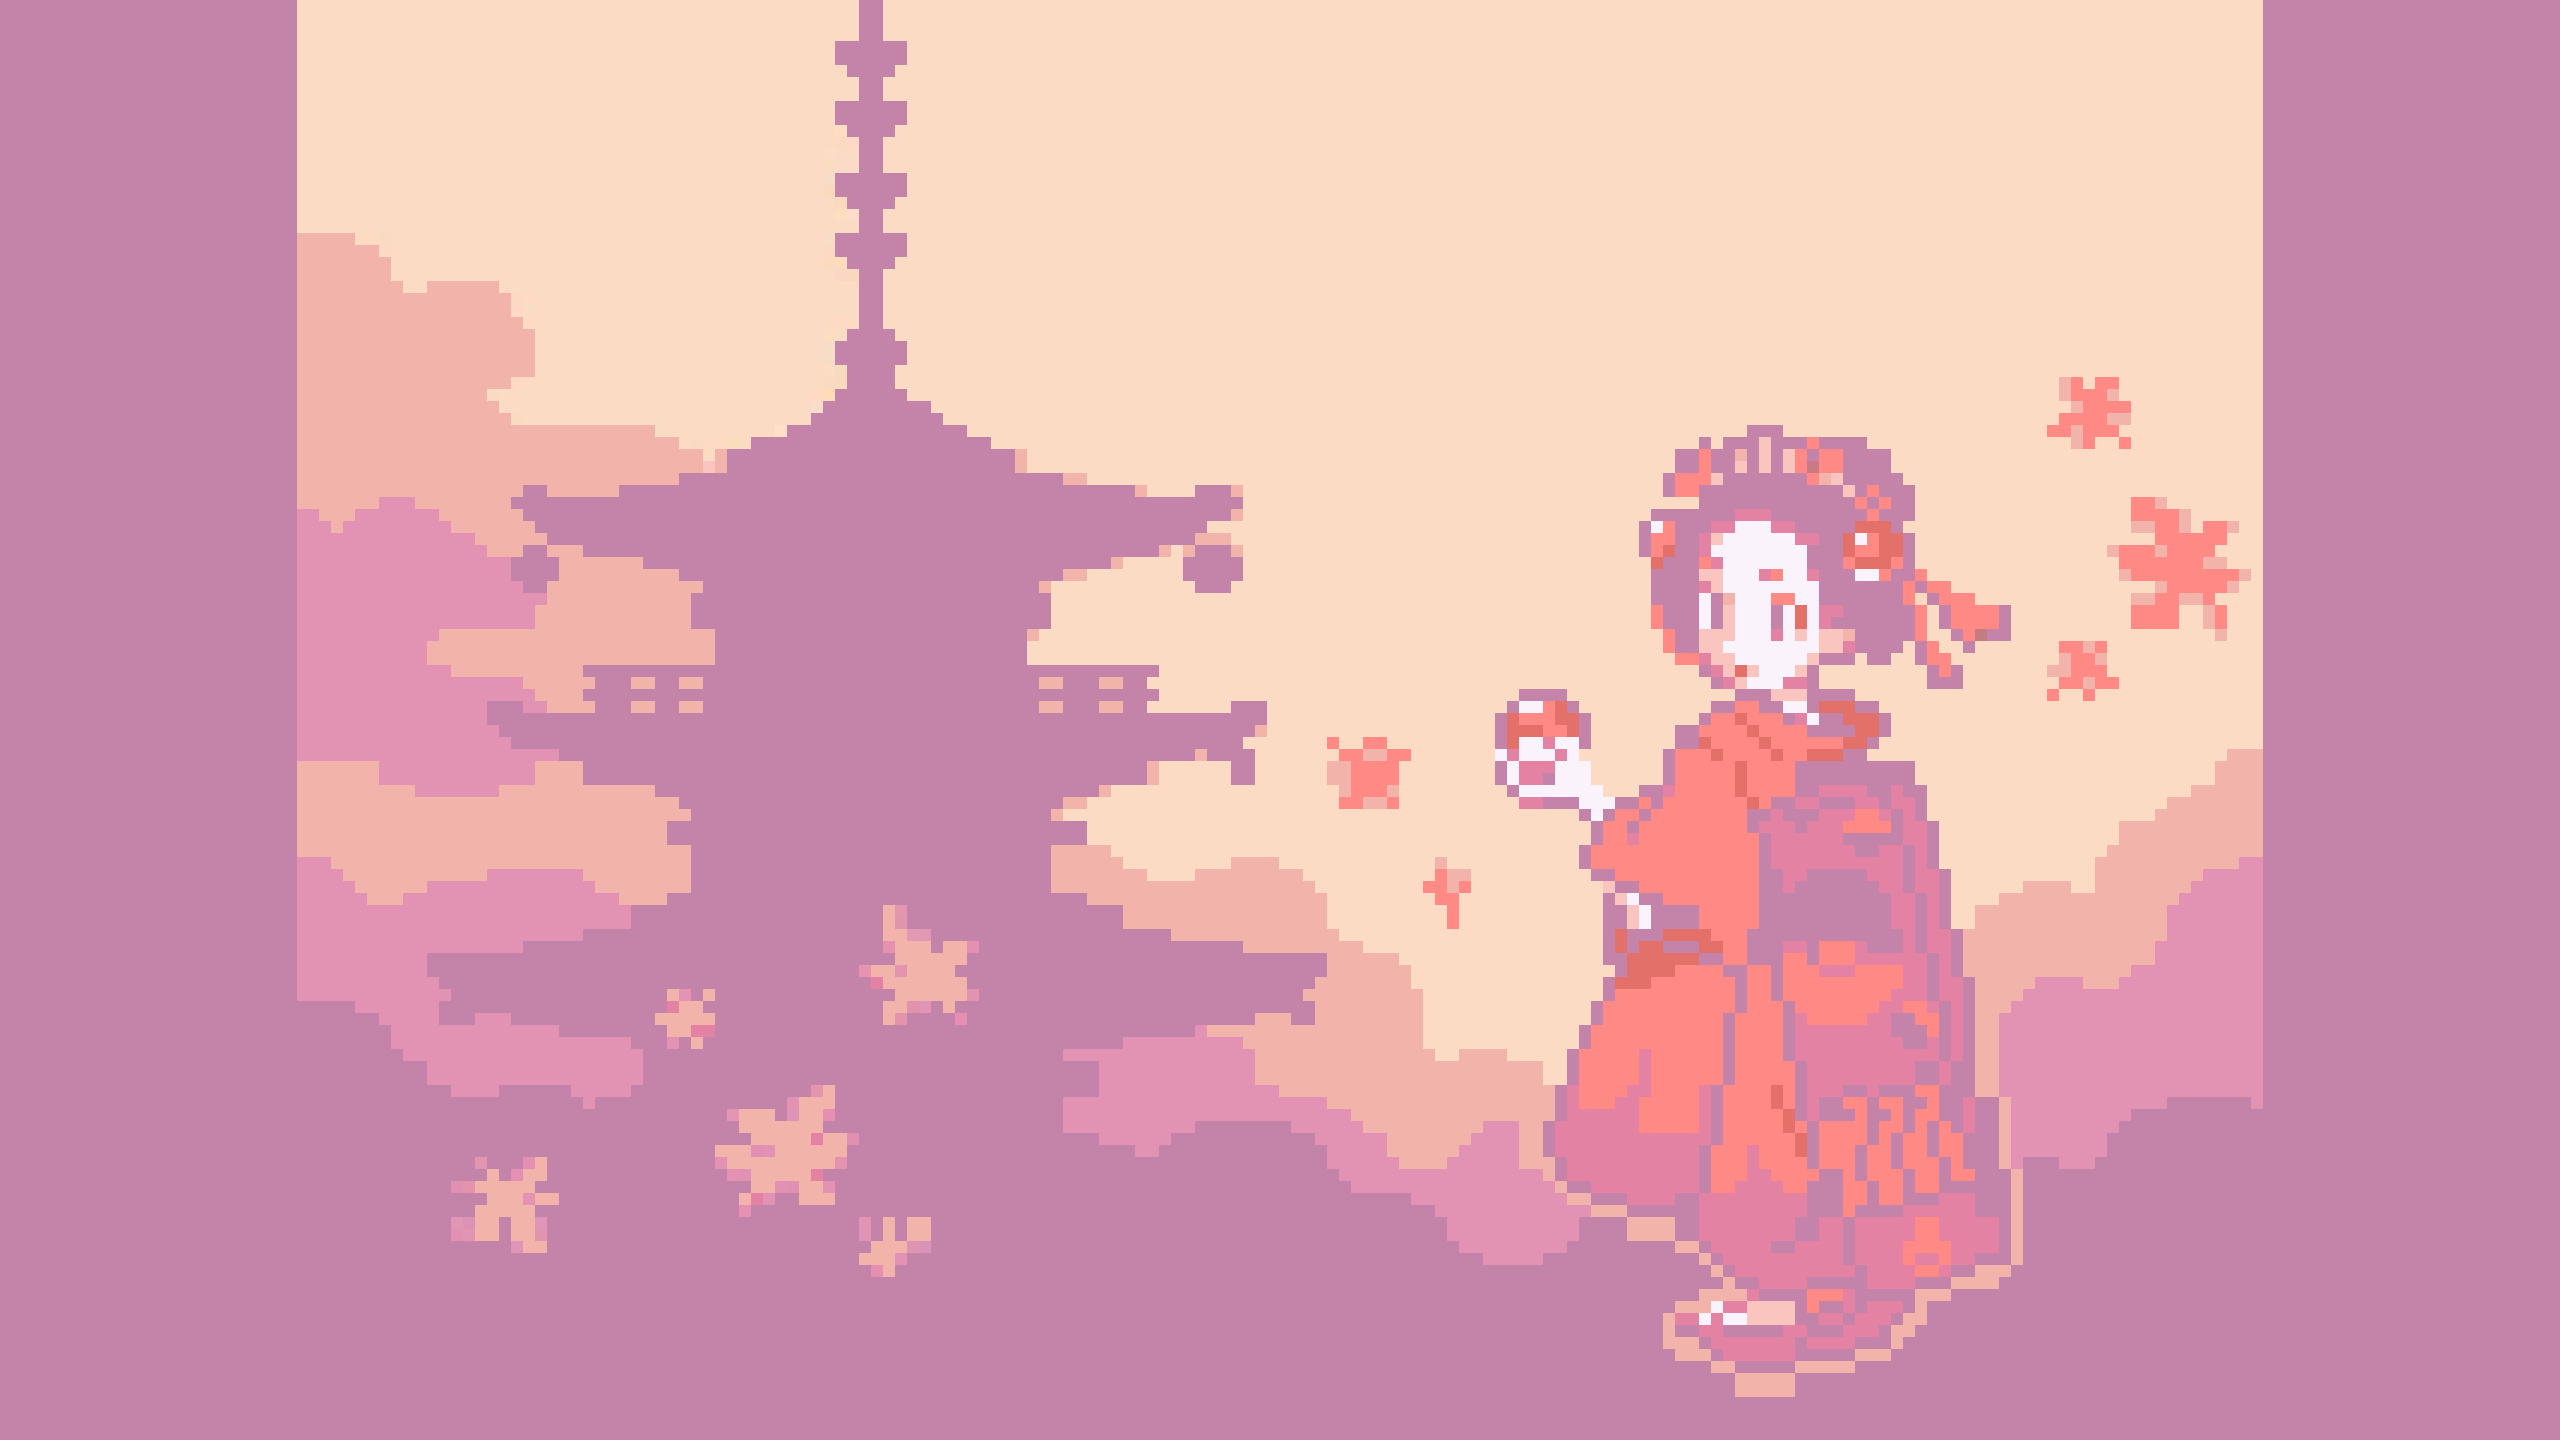 A pixelated image of a woman in traditional Japanese clothing holding a cherry blossom. - Pokemon